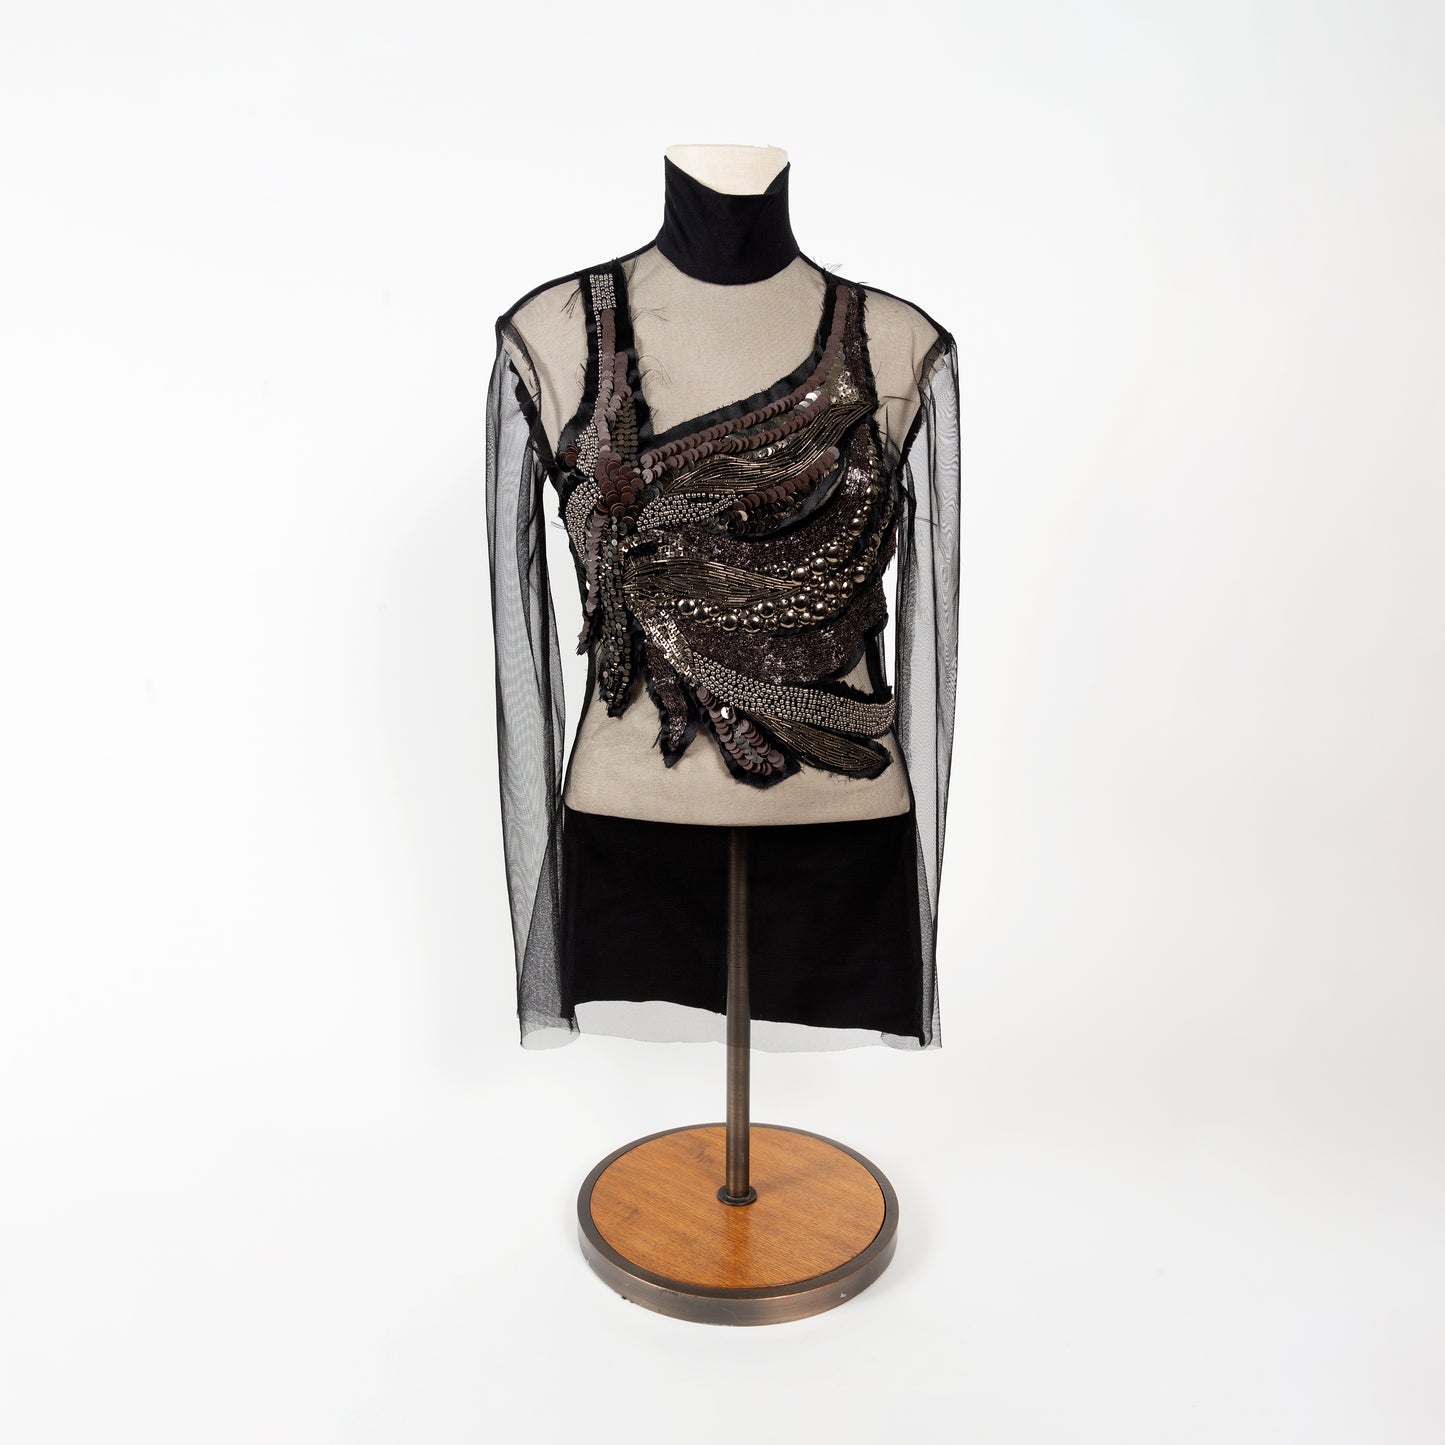 Sheer black leather and metallic embroidered top